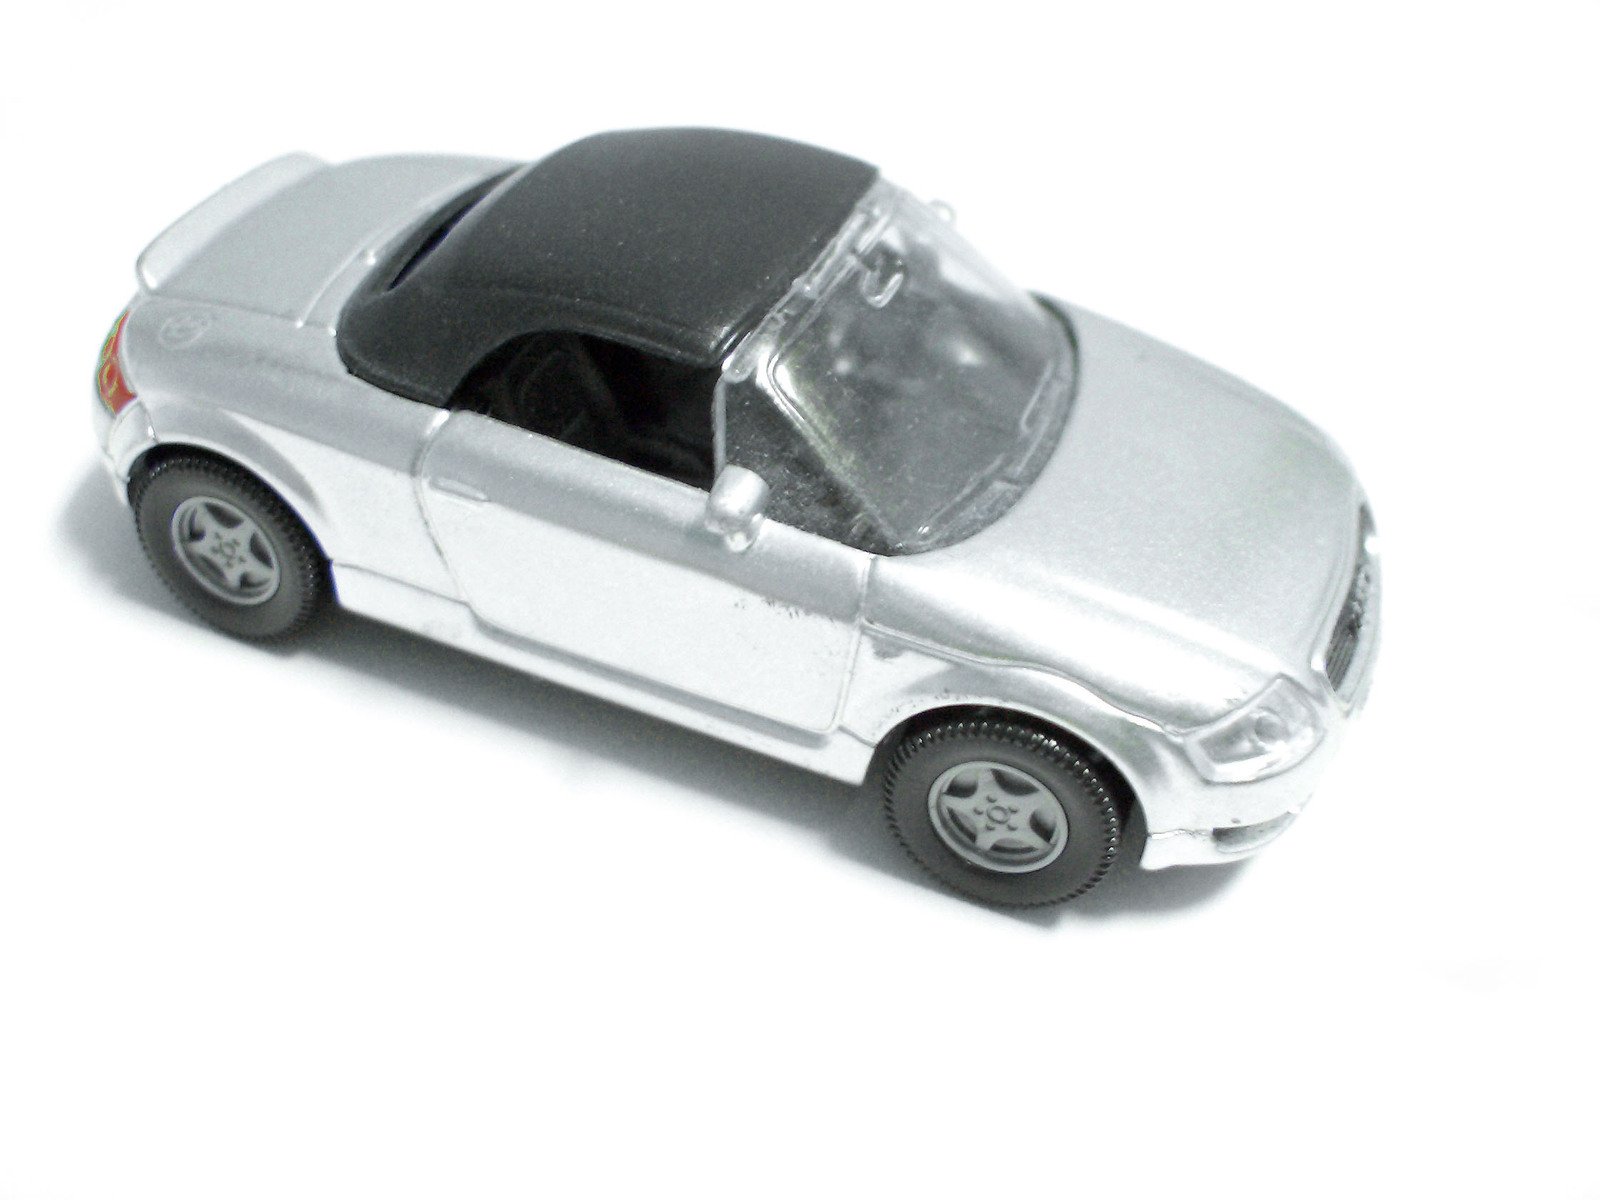 a toy car is shown on the white background